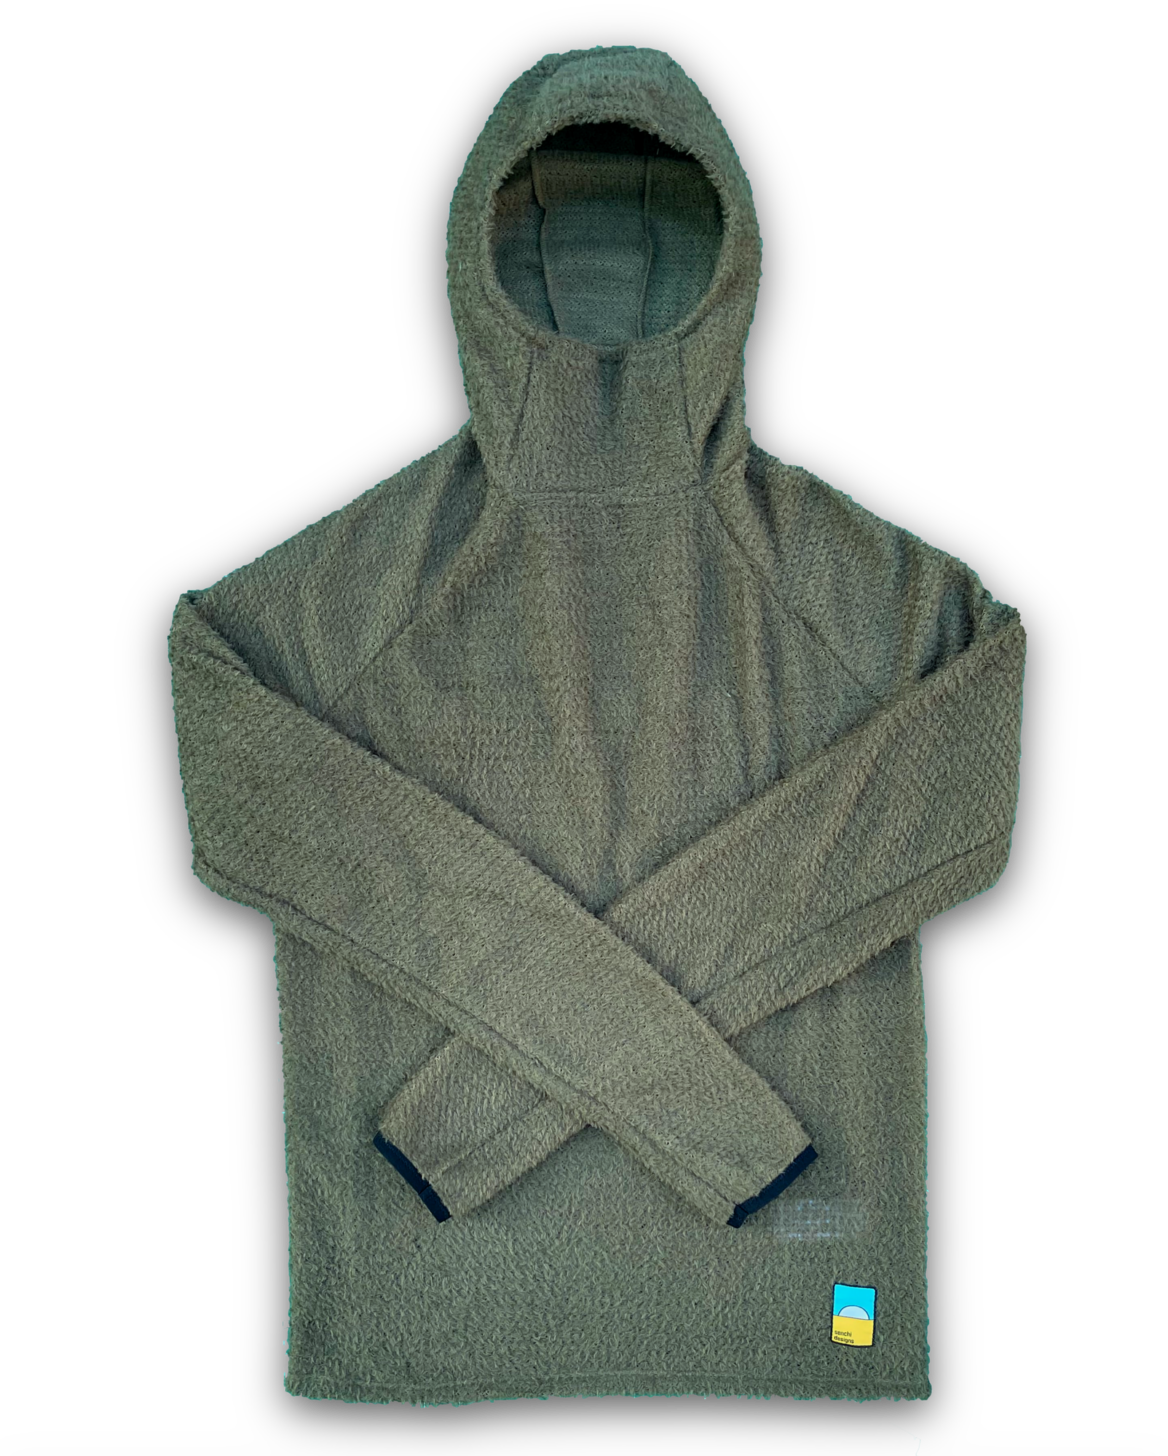 The Senchi Designs Lark hoodie against a white background